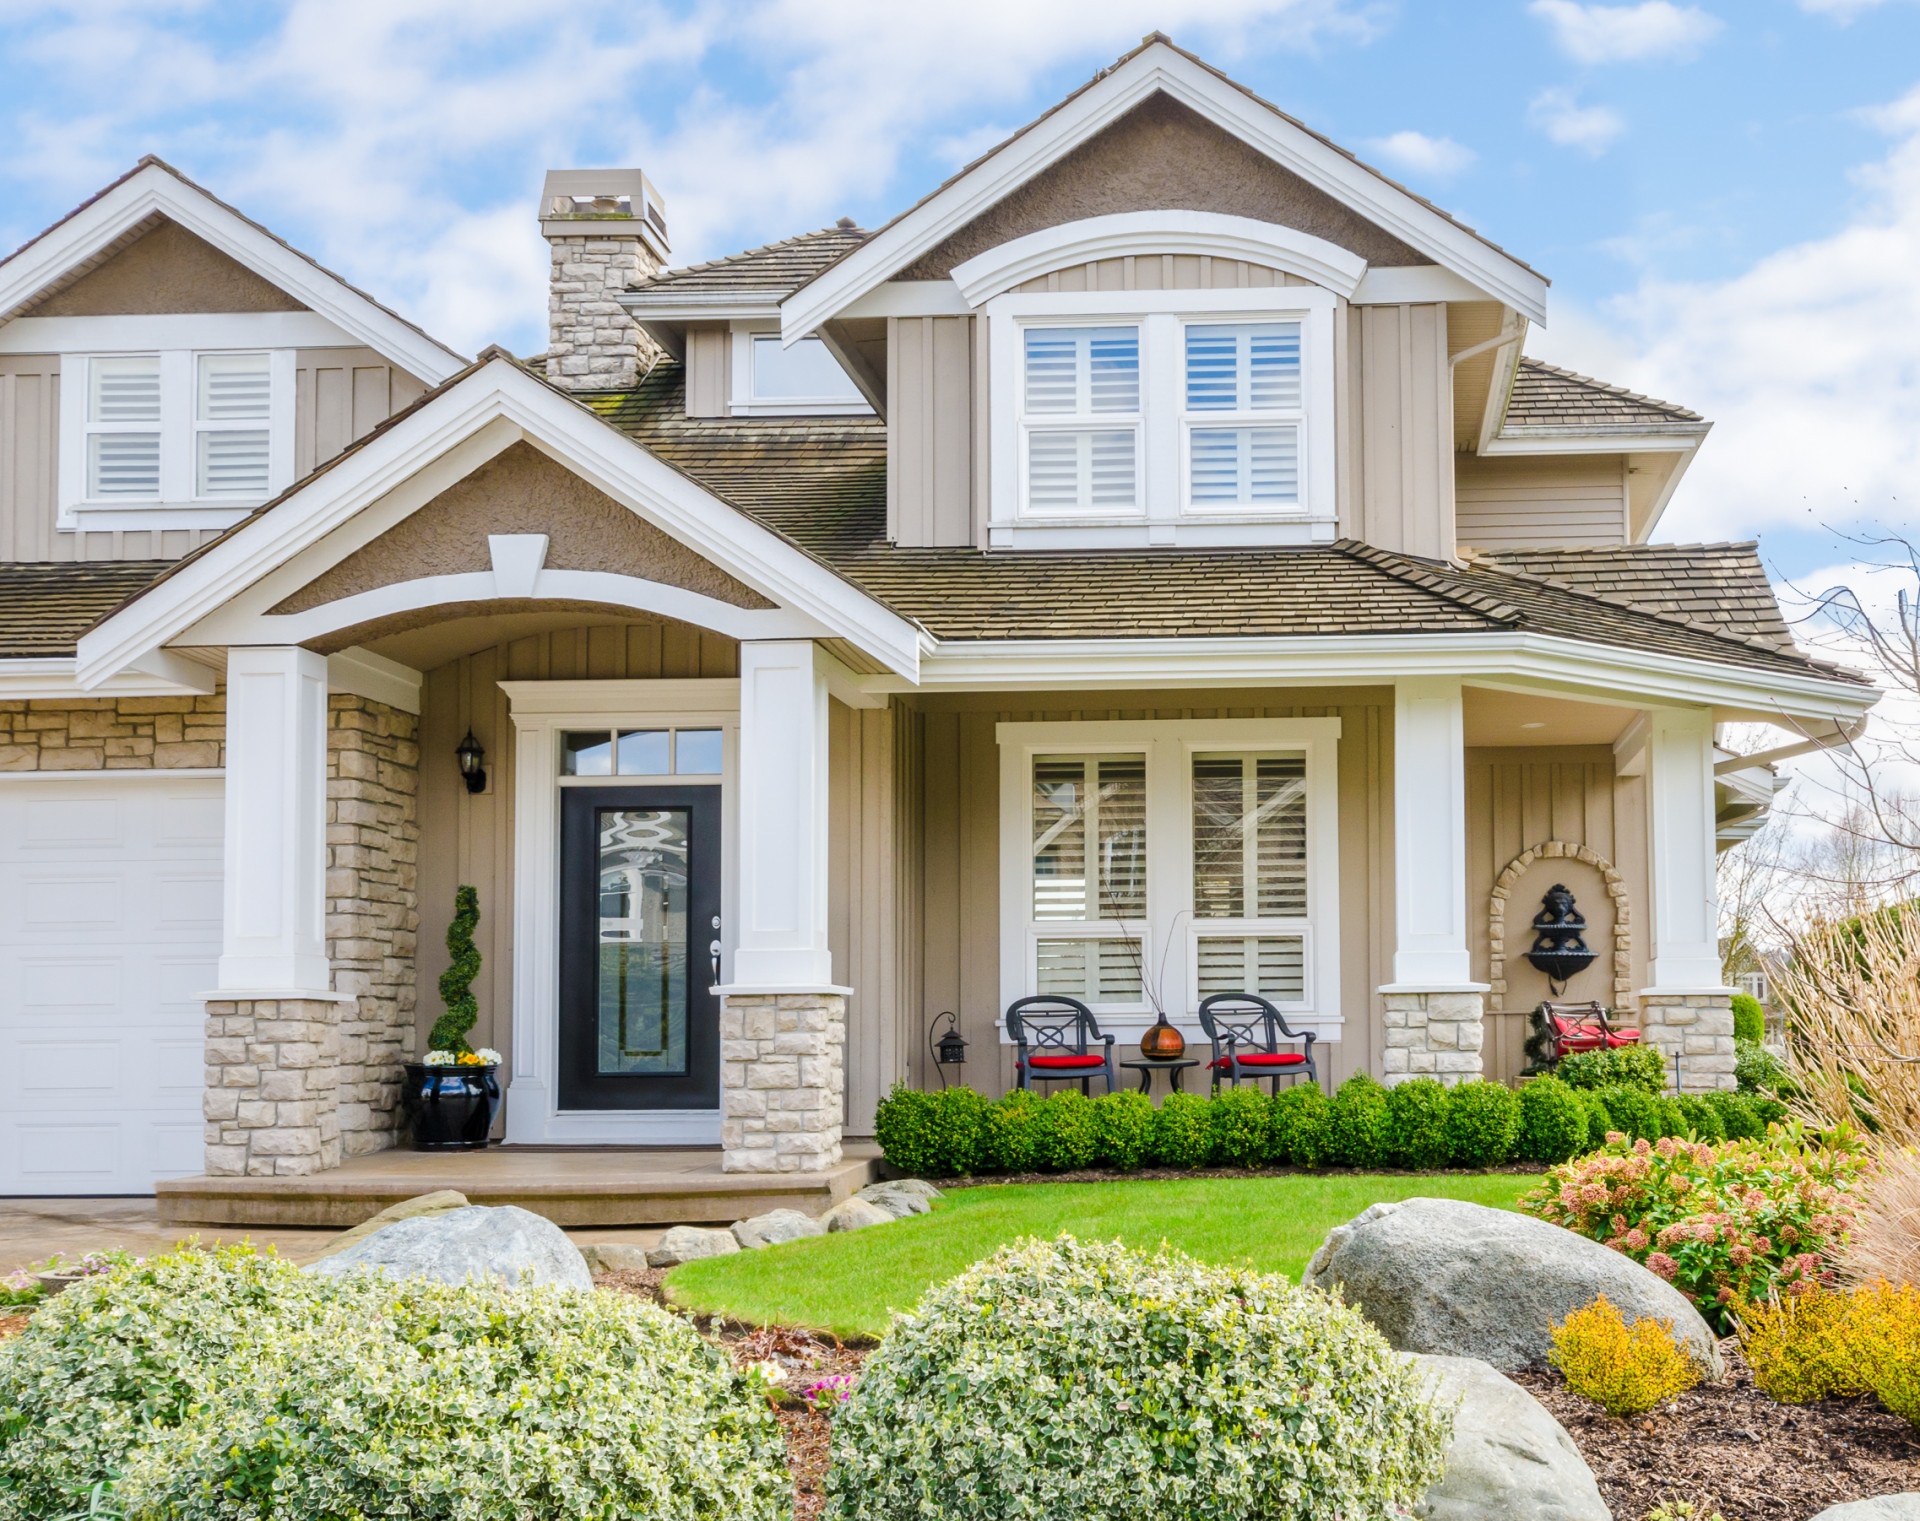 3 Steps to Attract Buyers to Your Home